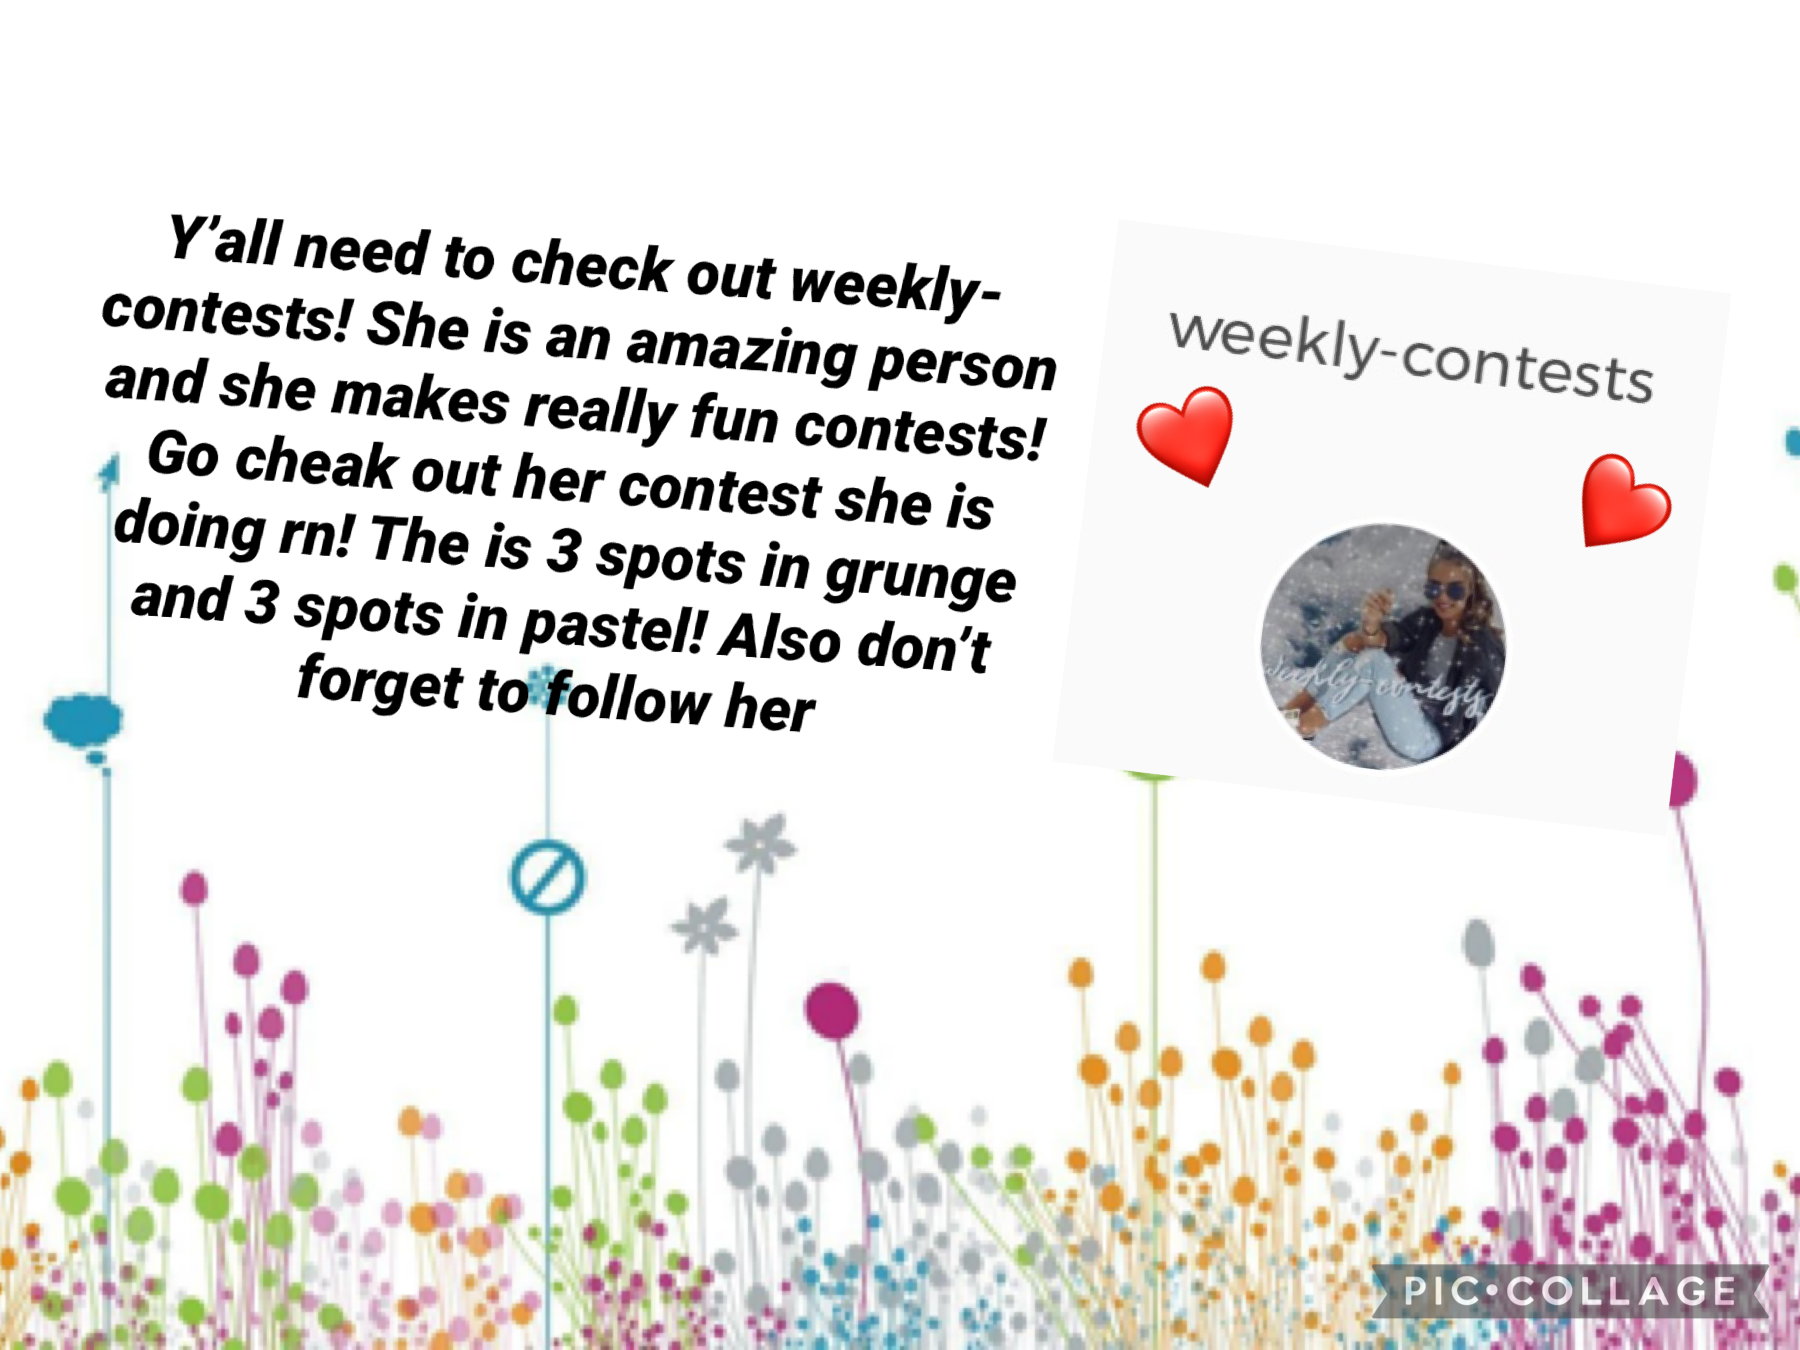 Go check out weekly-contests